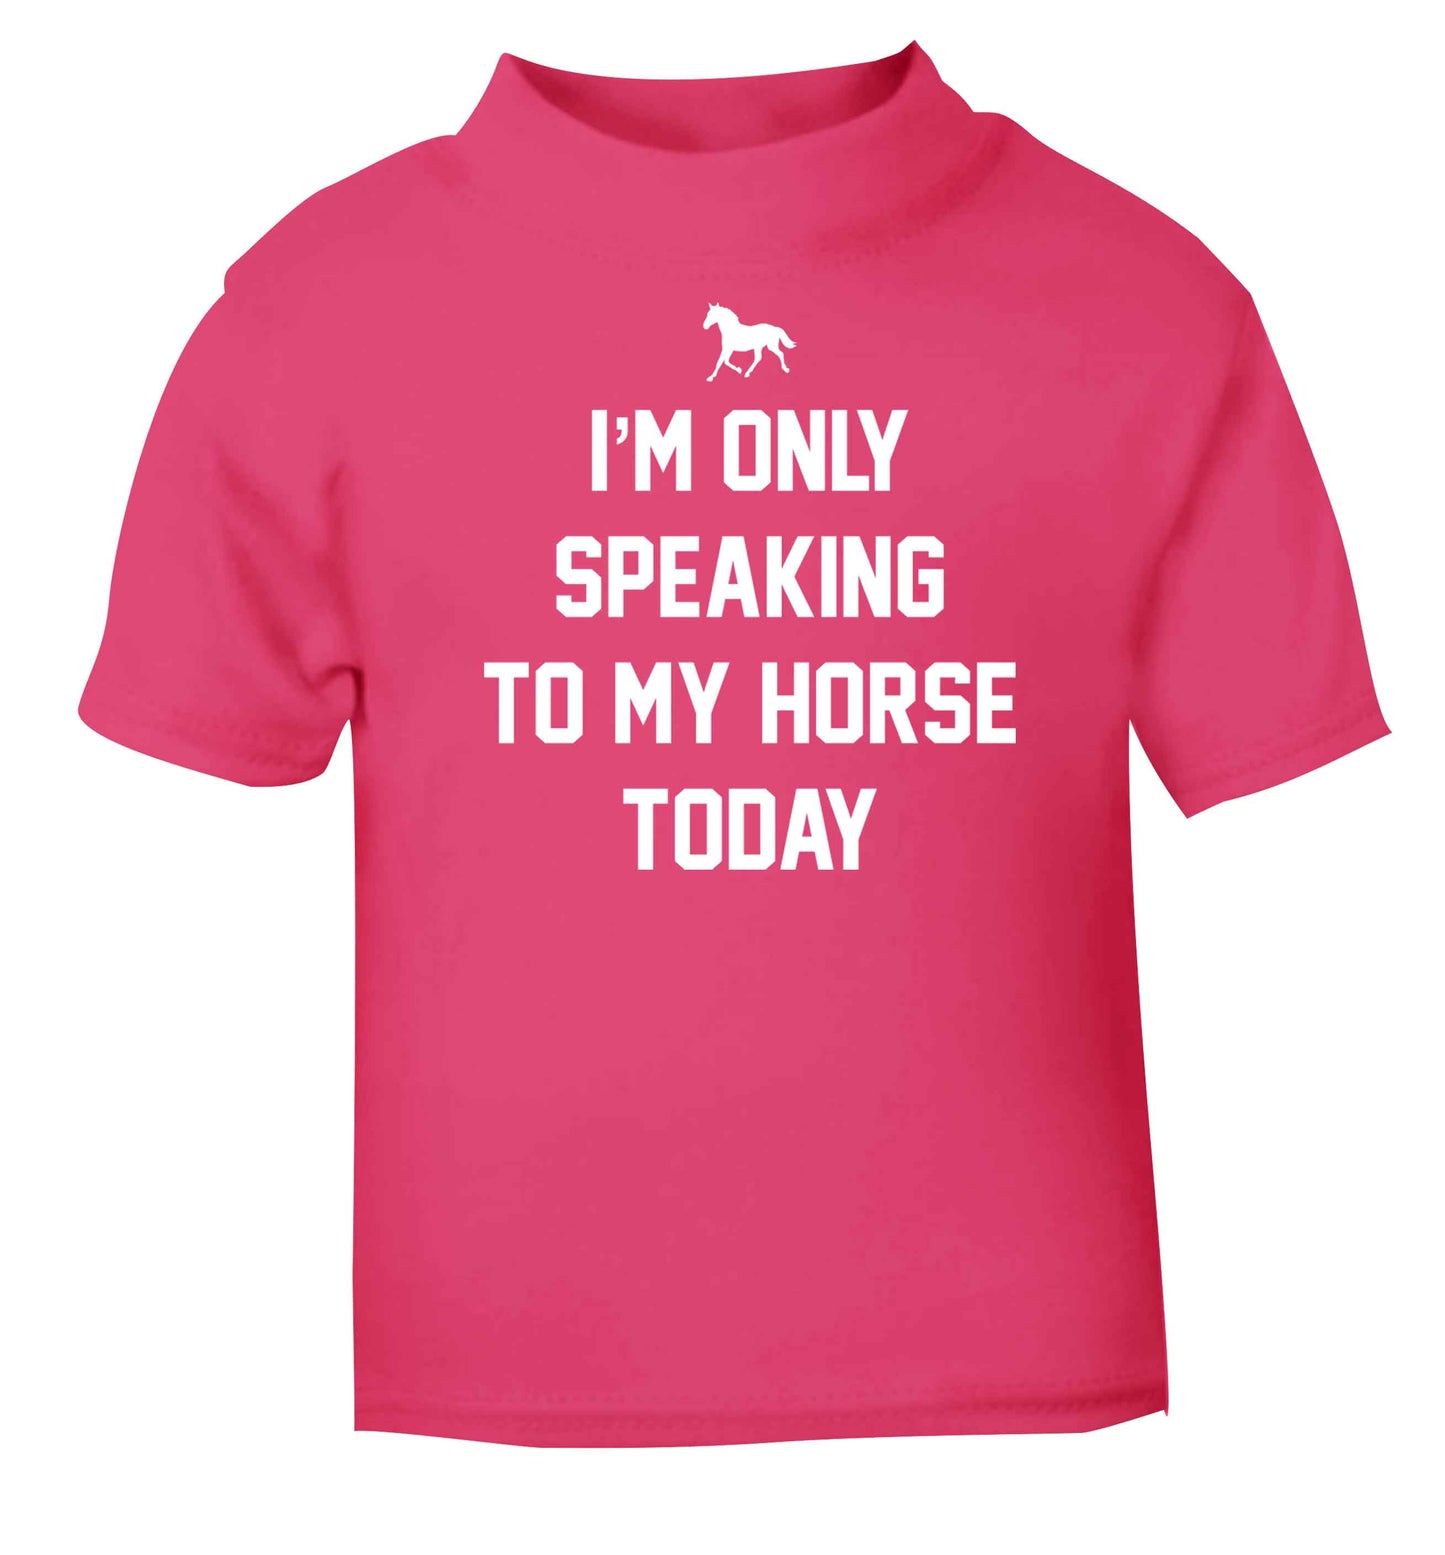 I'm only speaking to my horse today pink baby toddler Tshirt 2 Years